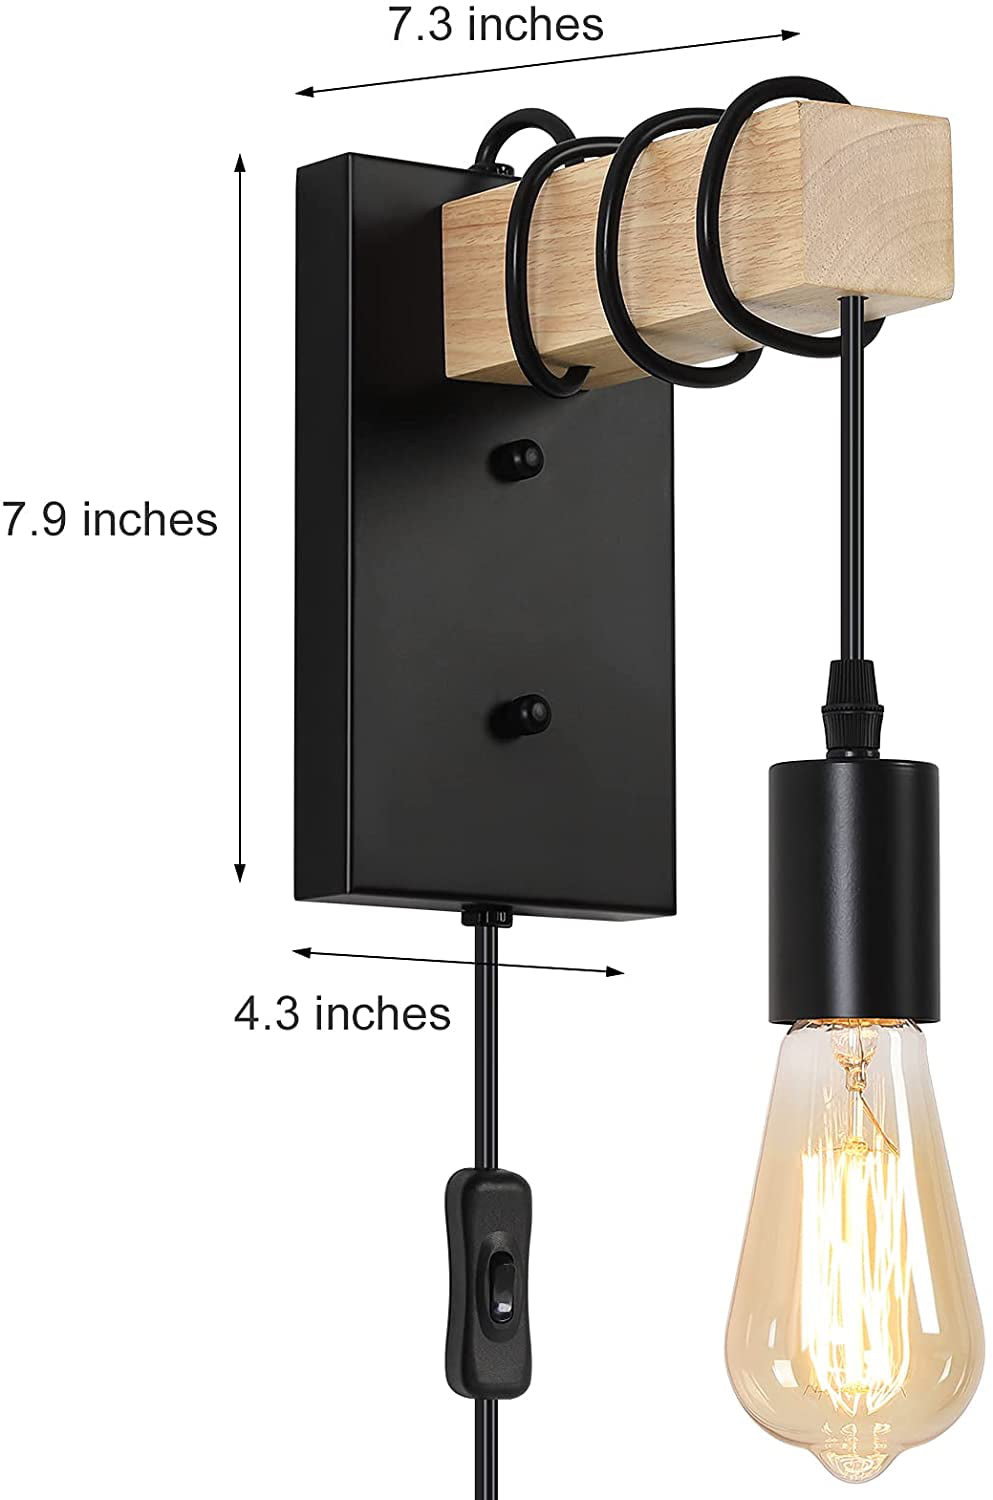 Plug in Wall Sconces, Industrial Wall Lamp with Solid Wood, Plug in Hardwired Sconce Fixtures, Edison Vintage Wall Mounted Lighting Walmart.com